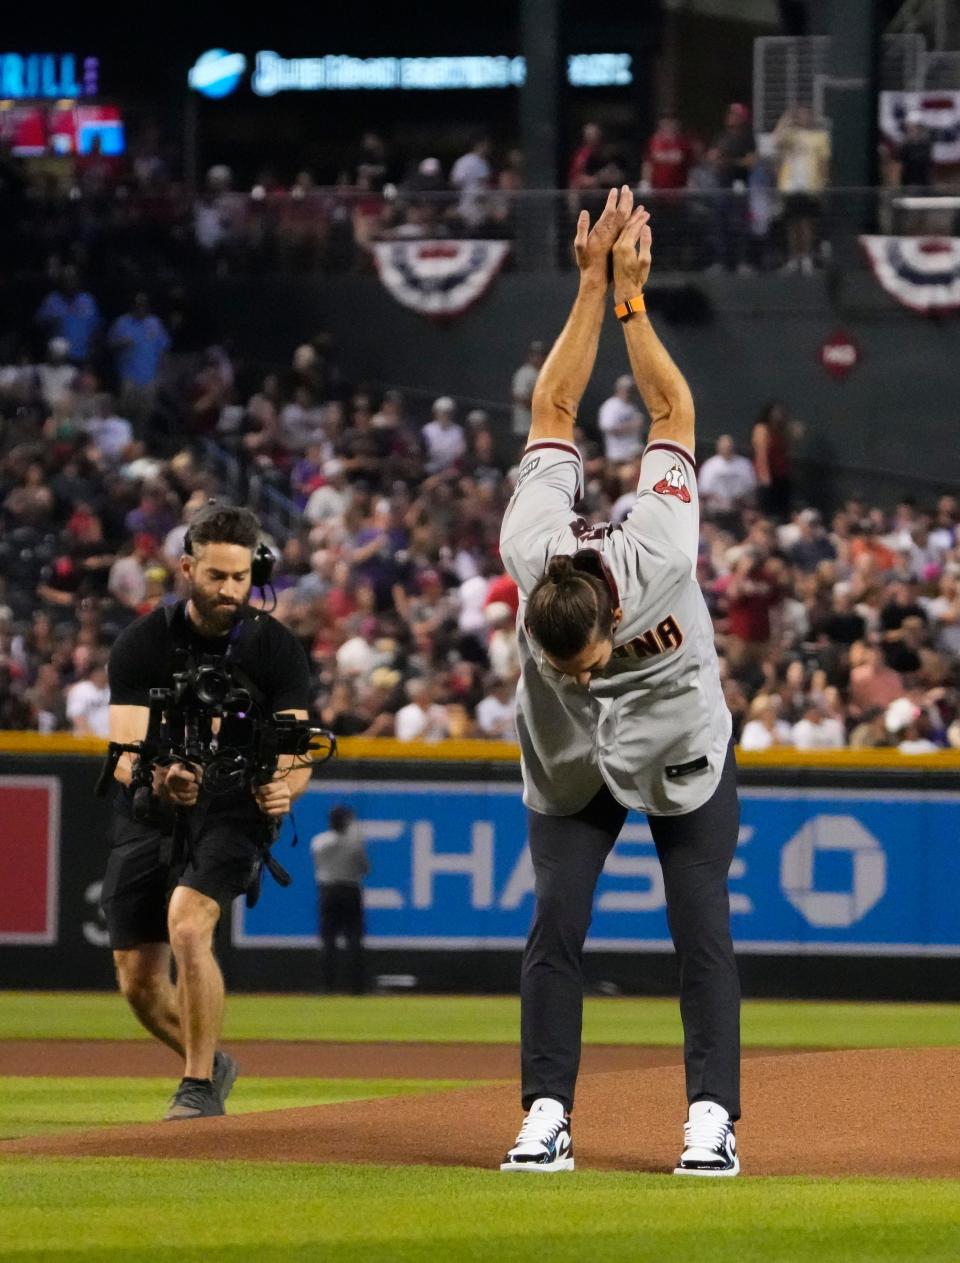 Michael Phelps gestures to the crowd before throwing out the ceremonial first pitch before Game 5 of the NLCS of the 2023 MLB playoffs between the Arizona Diamondbacks and the Philadelphia Phillies on Oct. 21, 2023, at Chase Field in Phoenix, AZ. The Phillies beat the Diamondbacks 6-1, giving Philadelphia the overall lead of 3-2 in the NLCS playoffs.